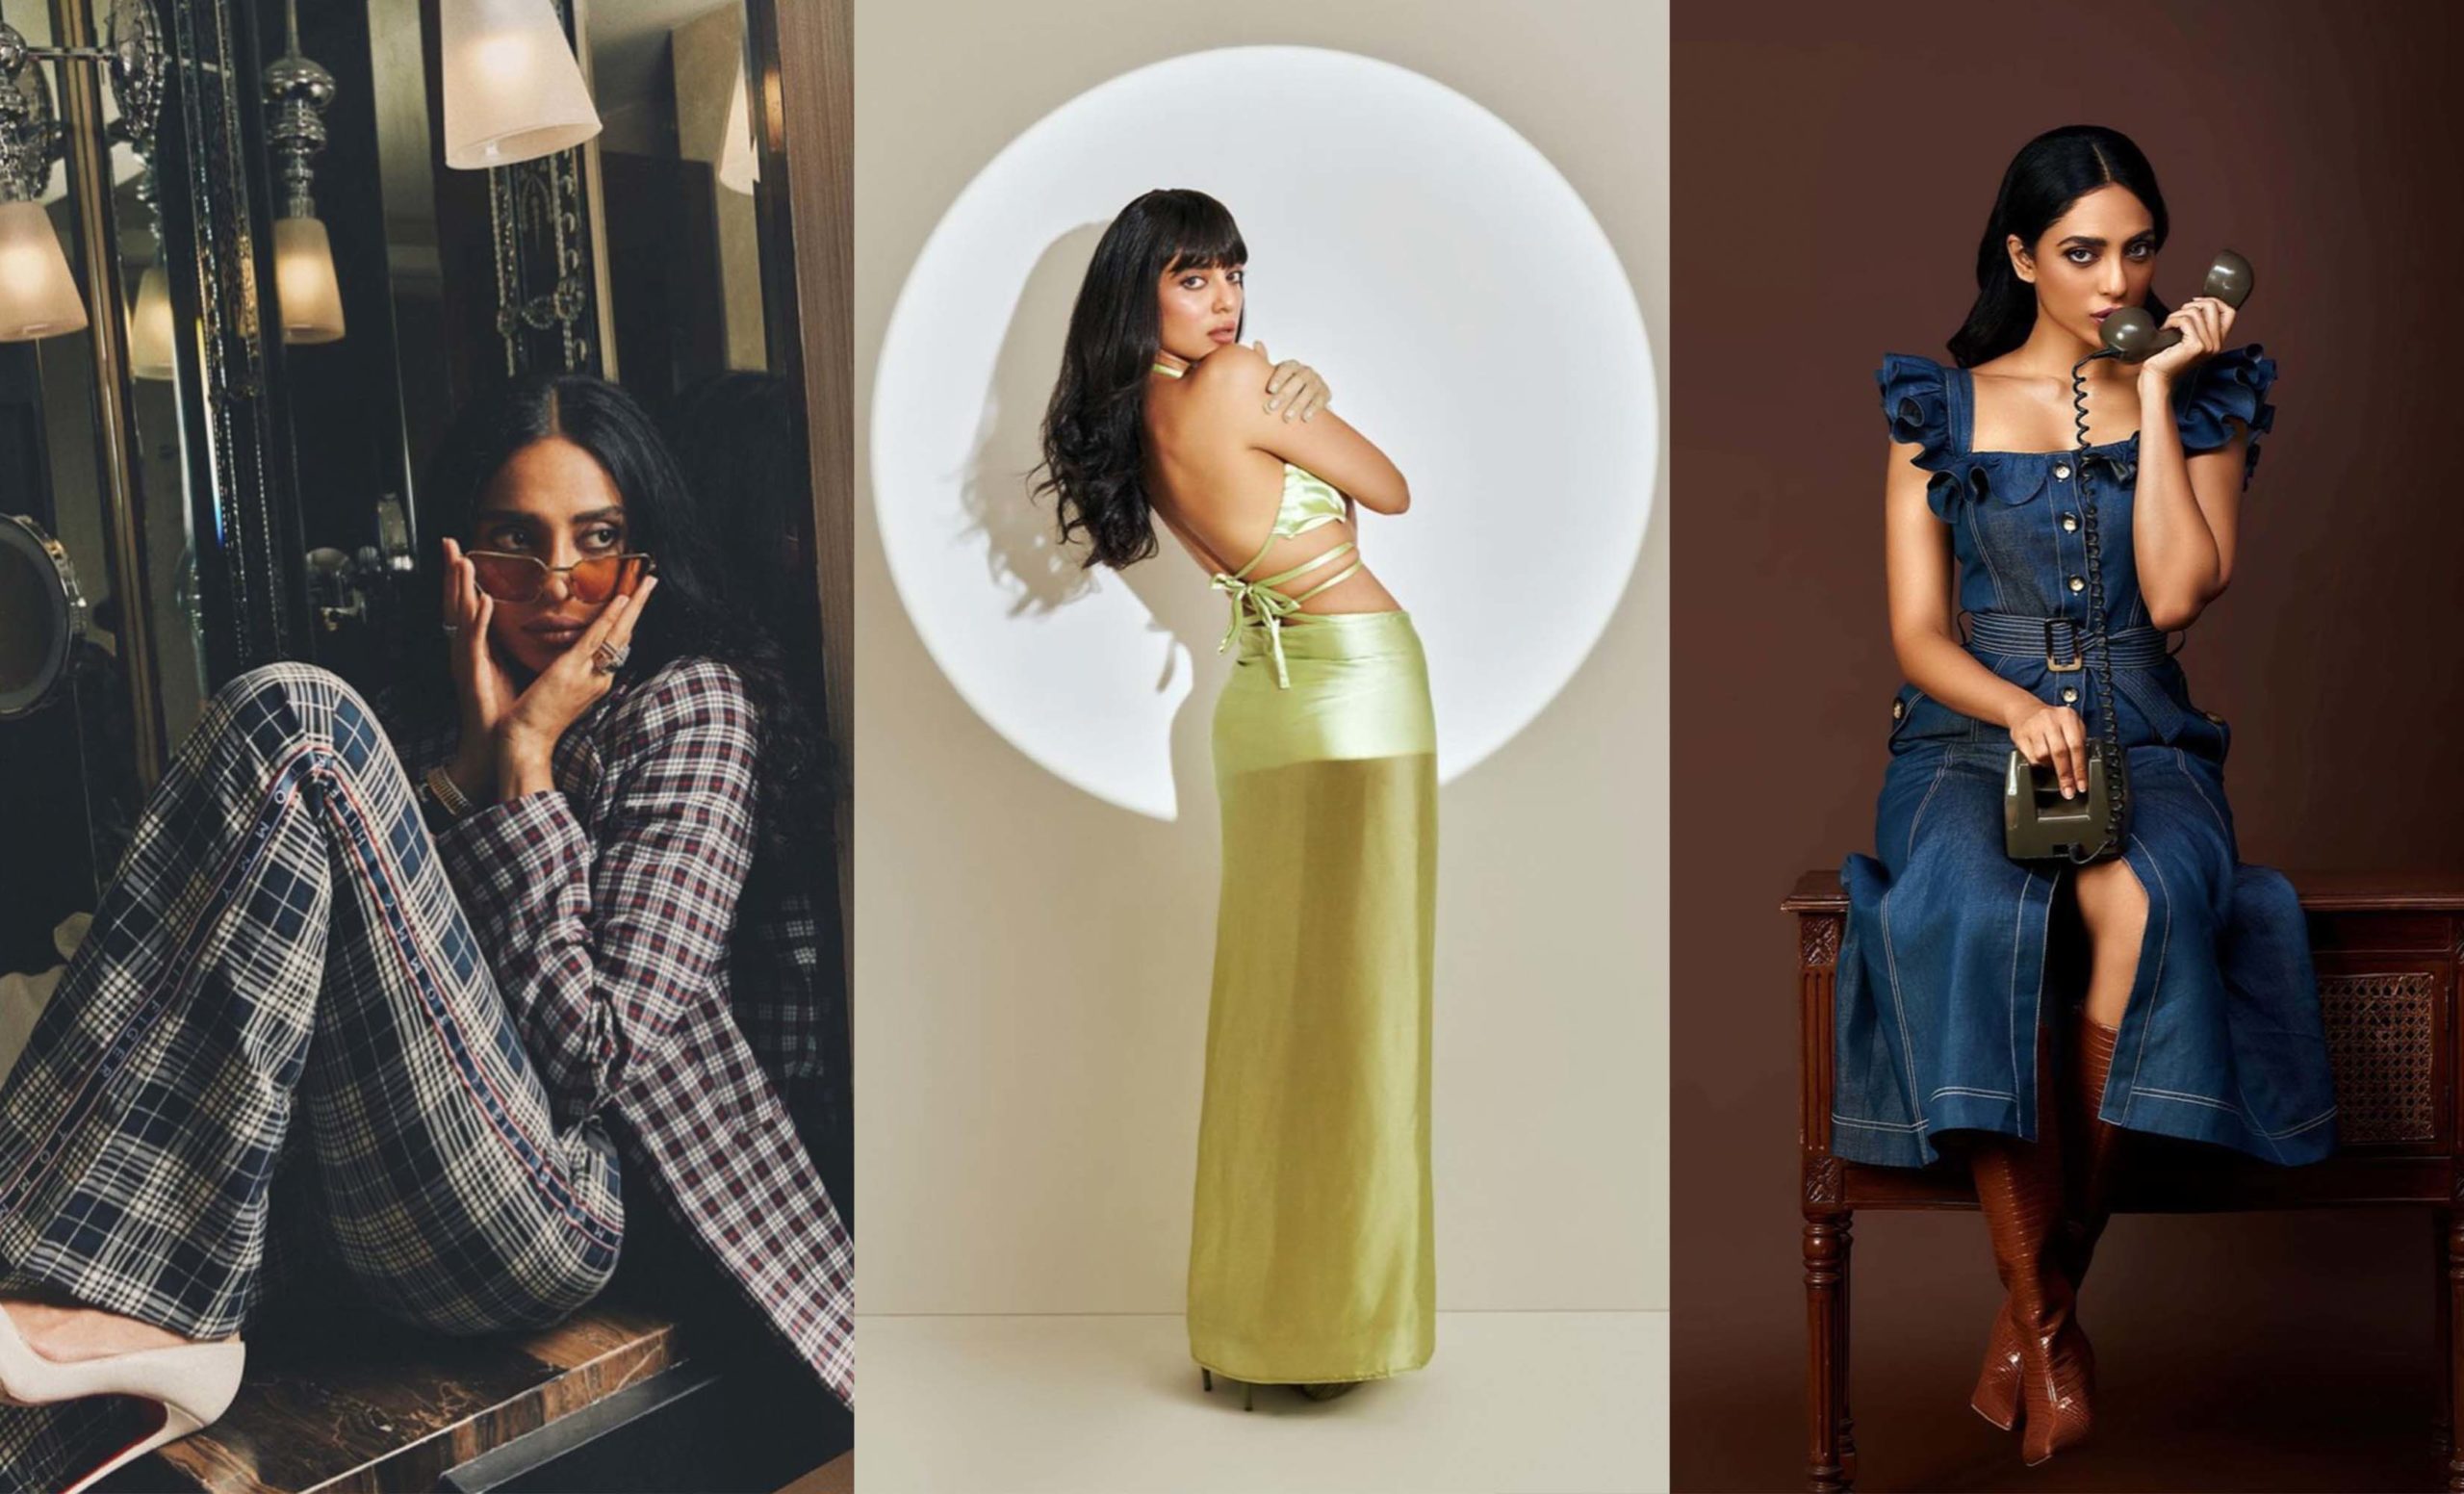 While No One Was Looking, Sobhita Dhulipala Was Winning At Fashion!